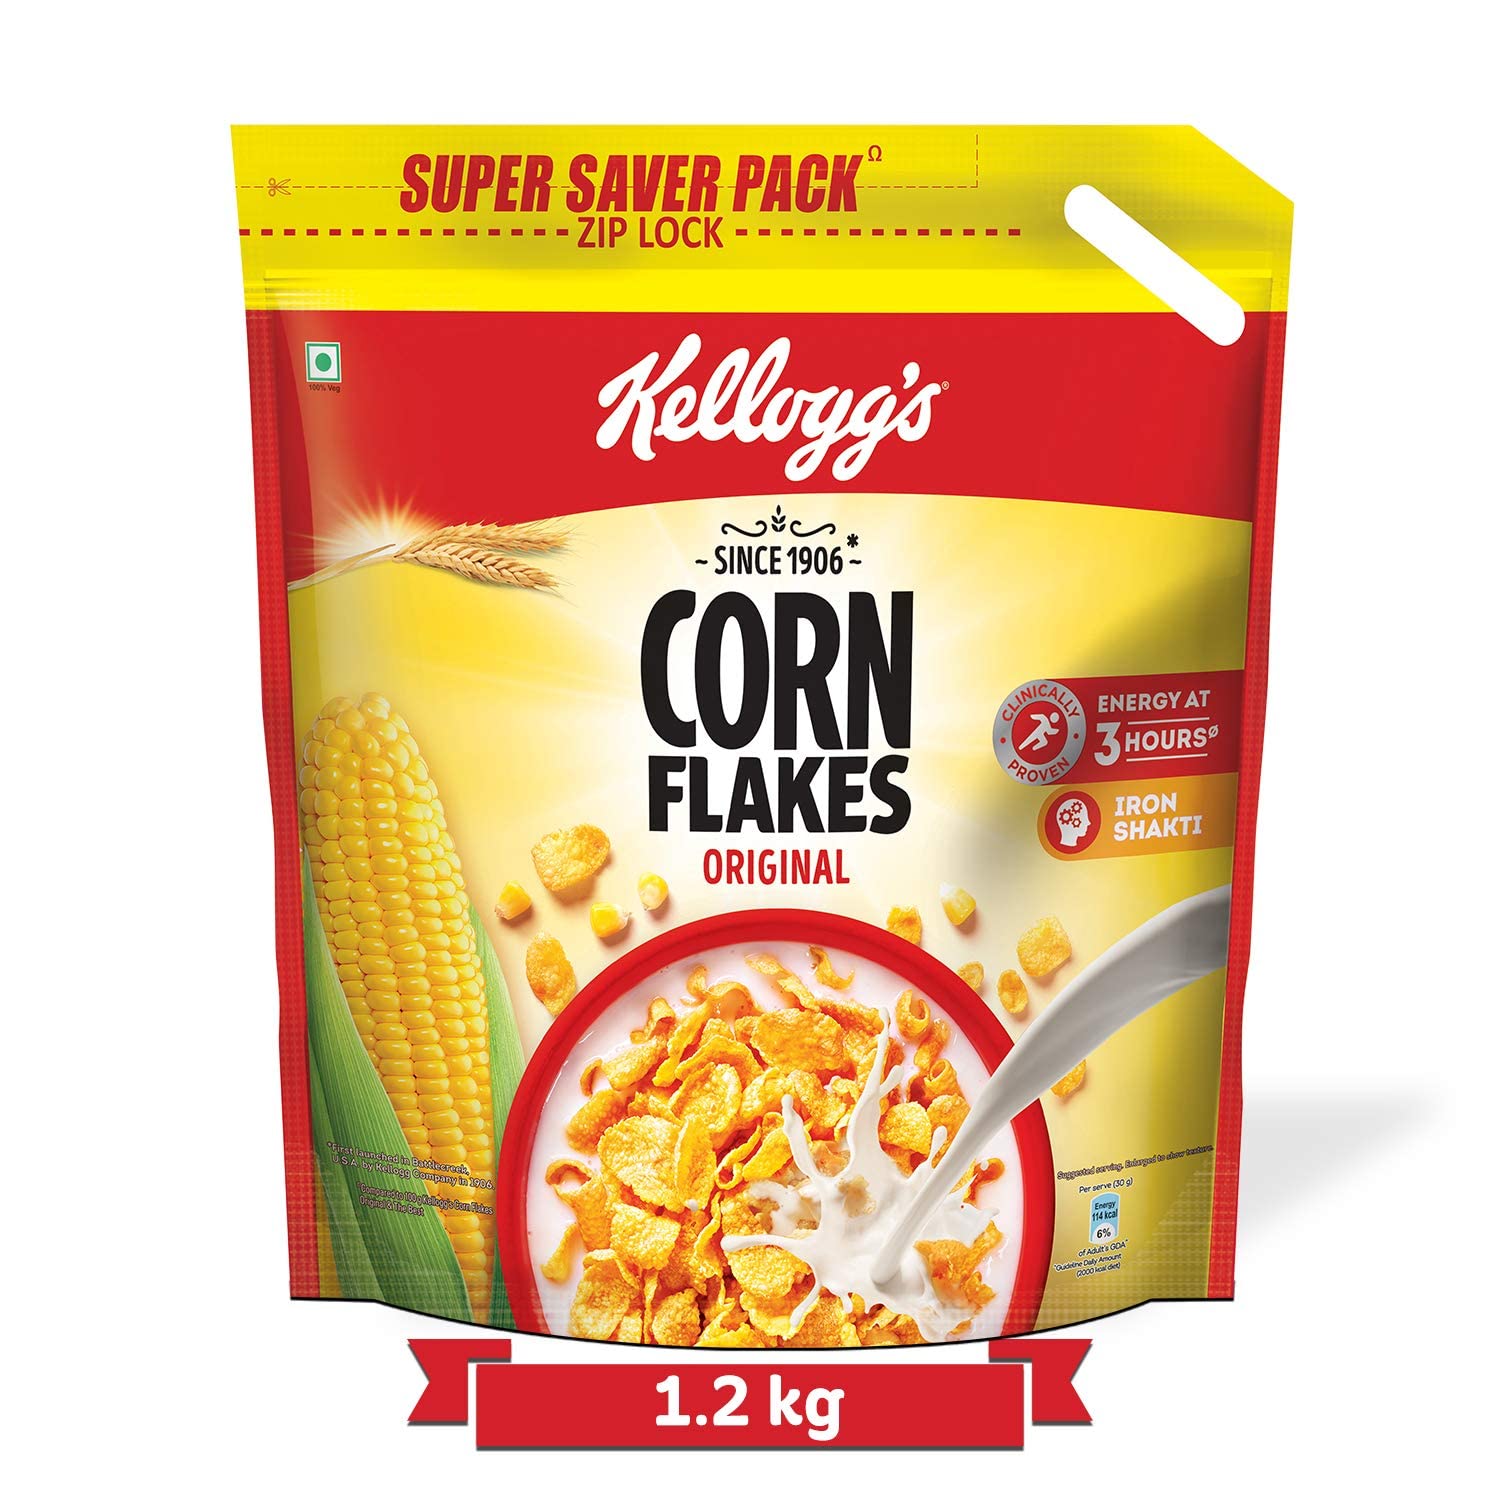 Kellogg's Corn Flakes Original, High in Iron, High in B Group Vitamins, Breakfast Cereals, 1.2 kg Pa